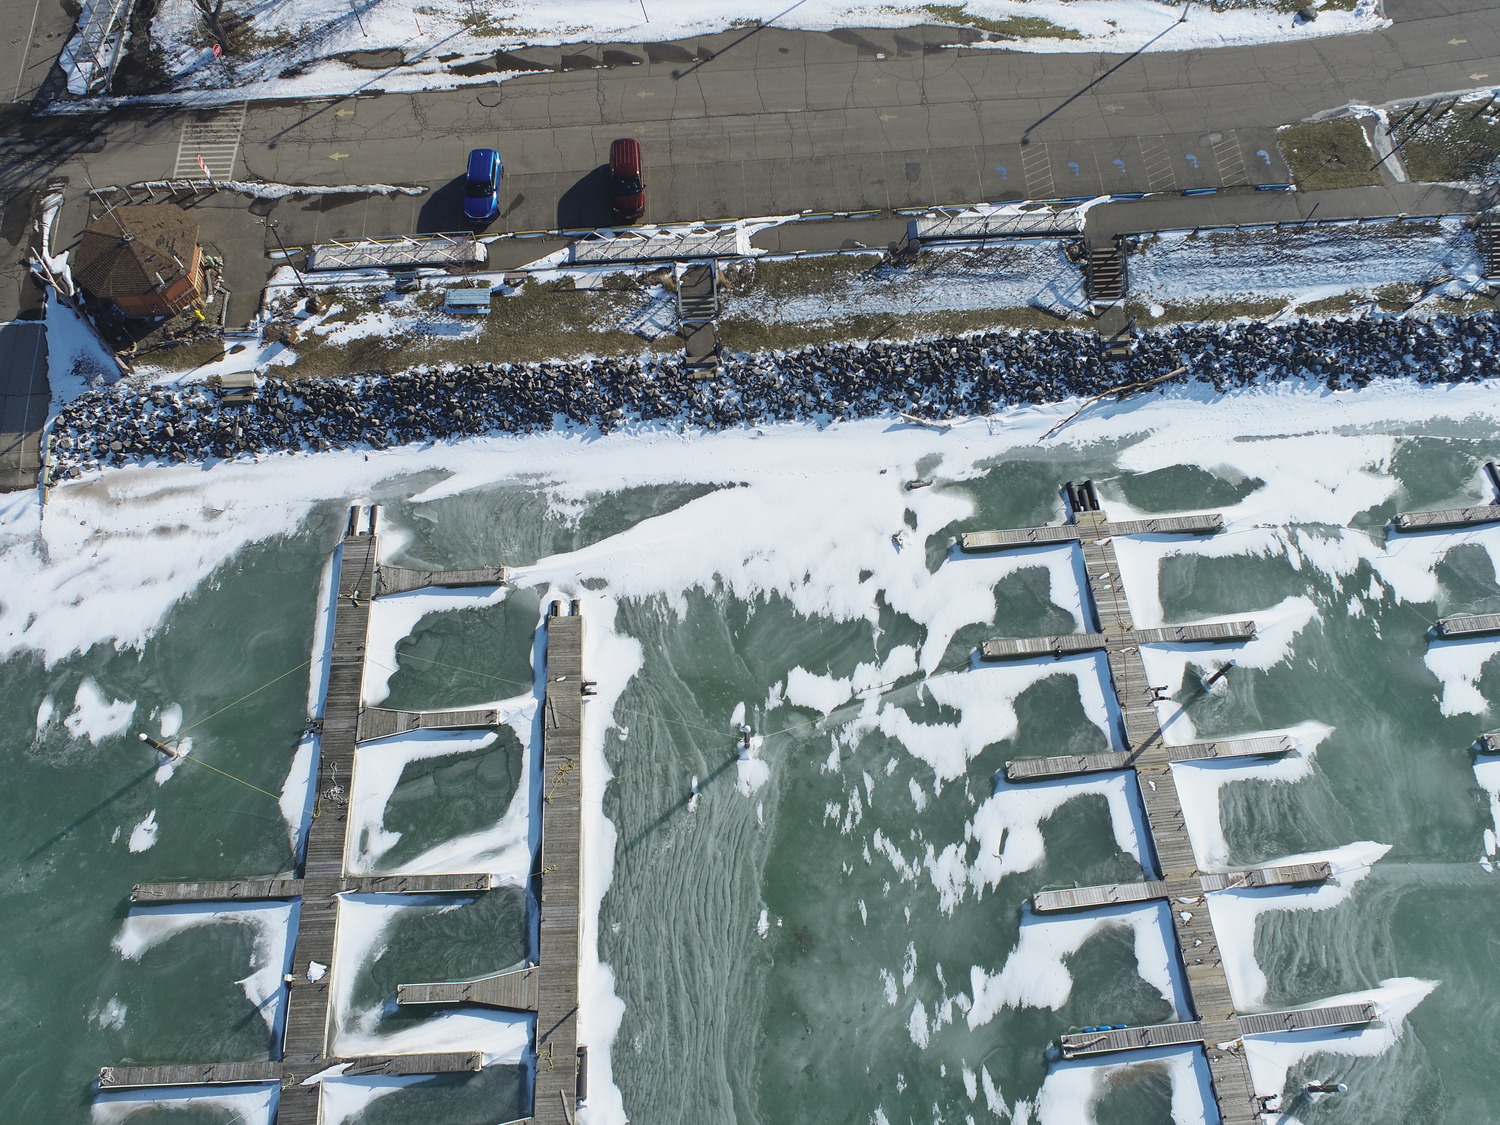 An aerial view of the docks in the frozen water at Sturgeon Point Marina